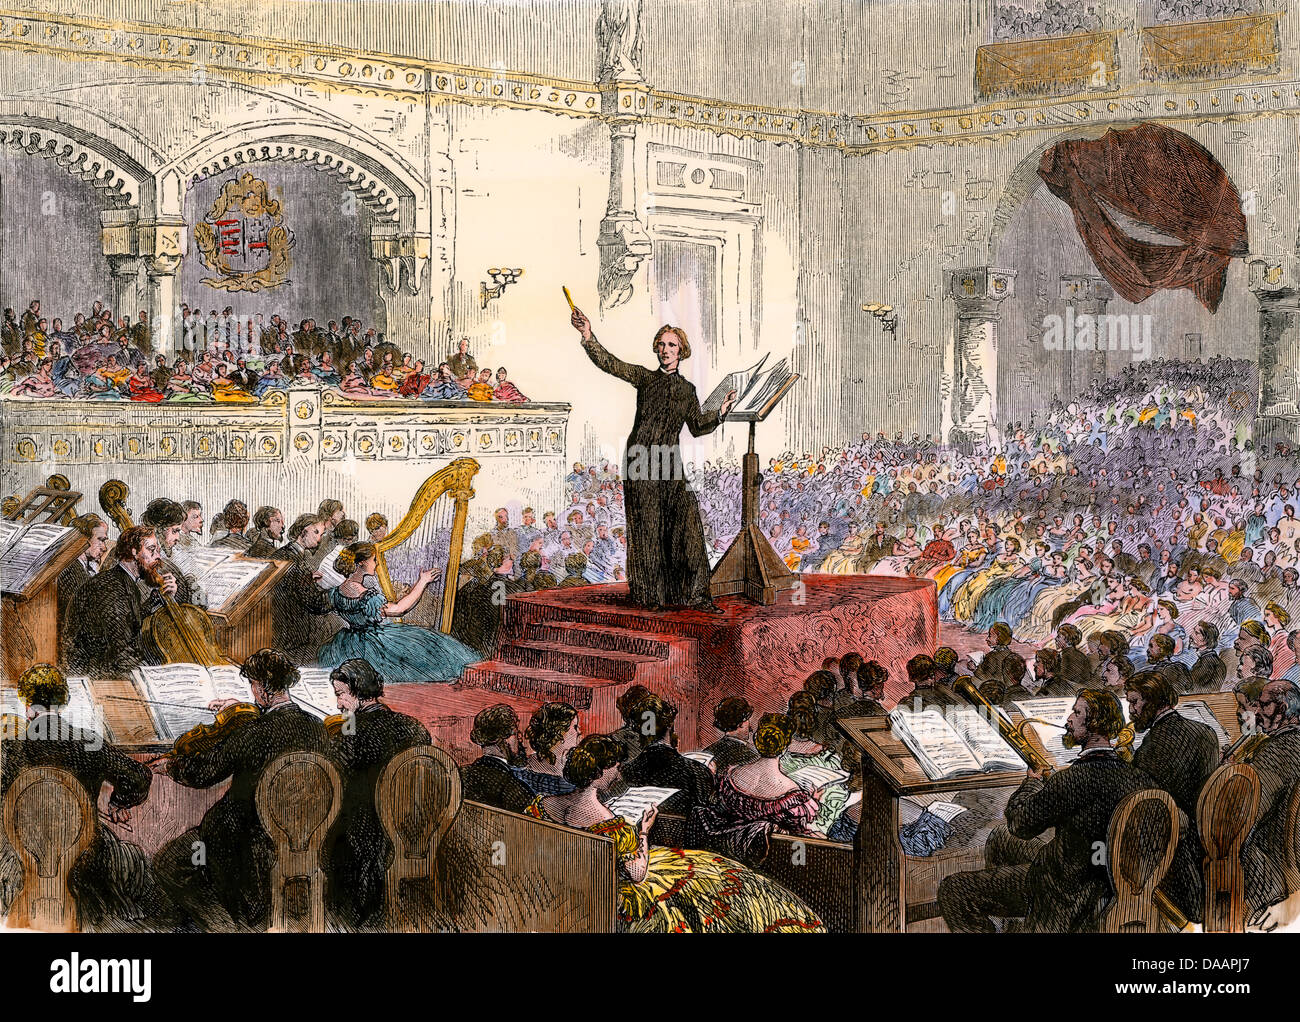 Franz Liszt conducting his new Oratorio at Budapest, Hungary, 1860s. Hand-colored woodcut Stock Photo